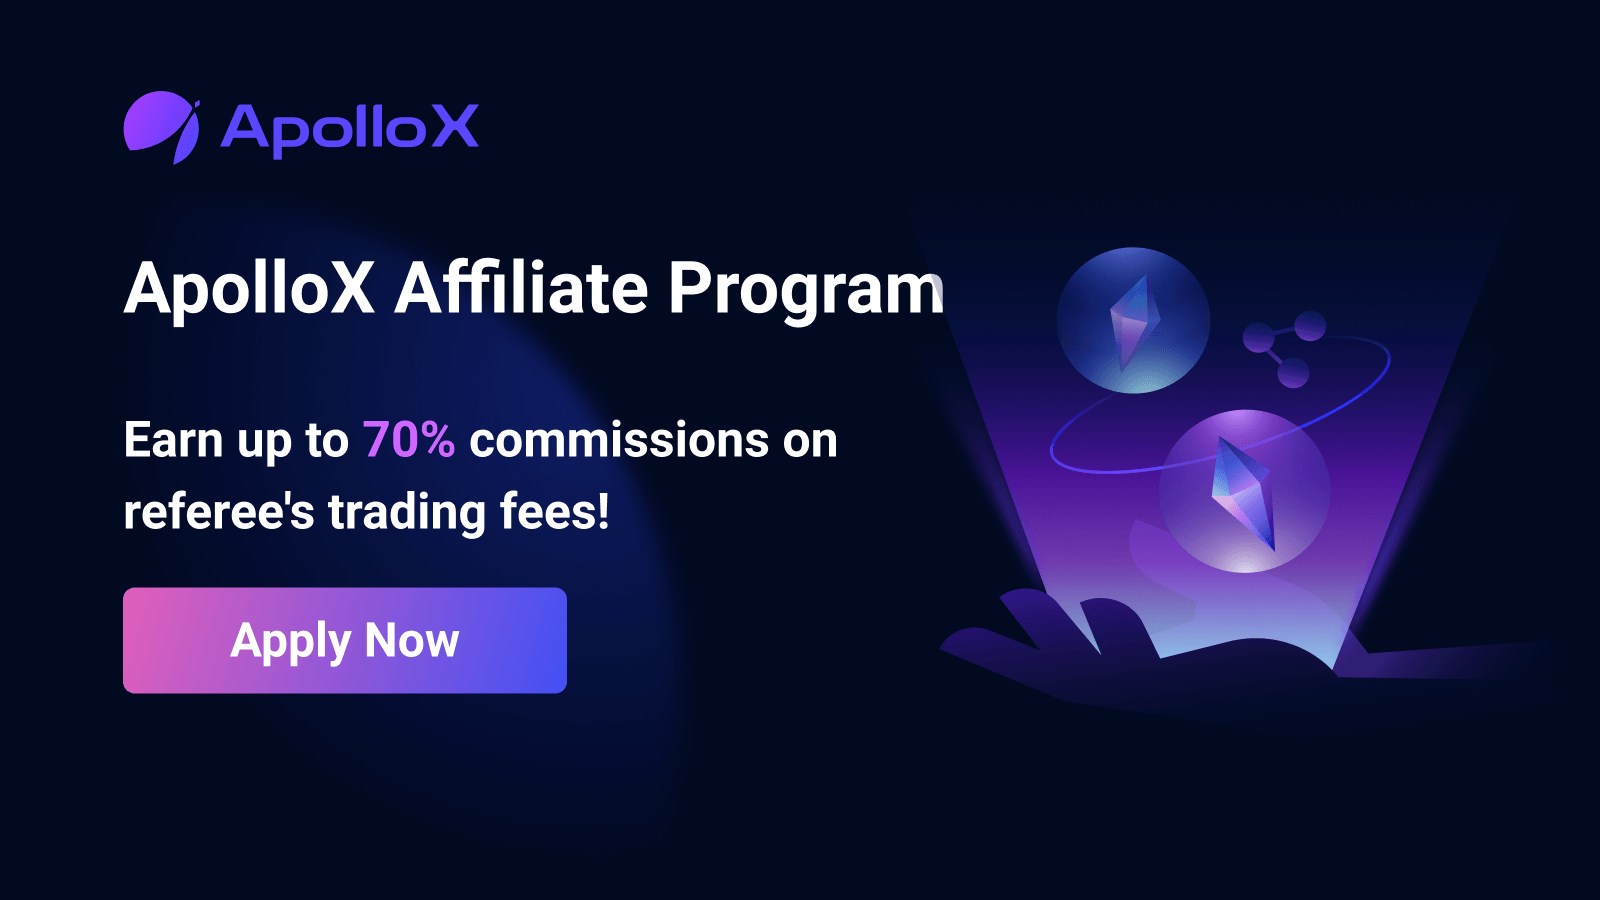 How to join Affiliate Program and become a Partner in ApolloX